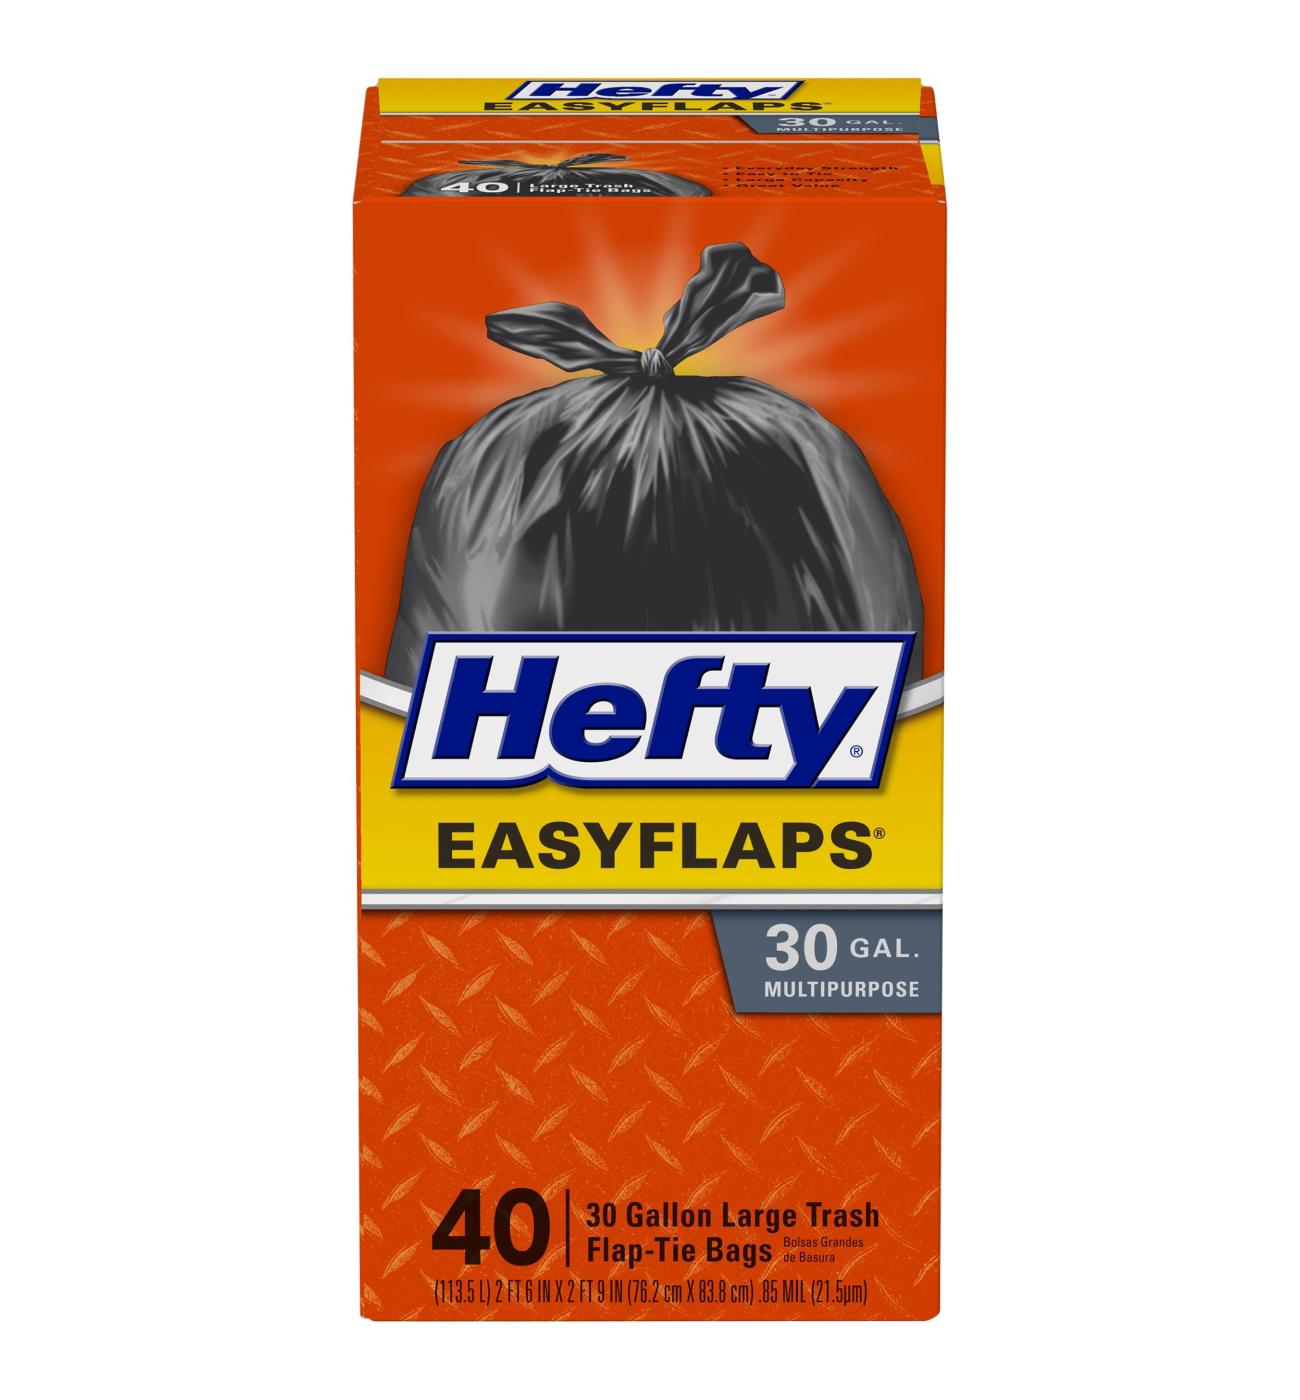 Giant Eagle Large Easy-Tie Flap Top Trash Bags, 30 Gallons, 40 Count at  Select a Store, Neighborhood Grocery Store & Pharmacy